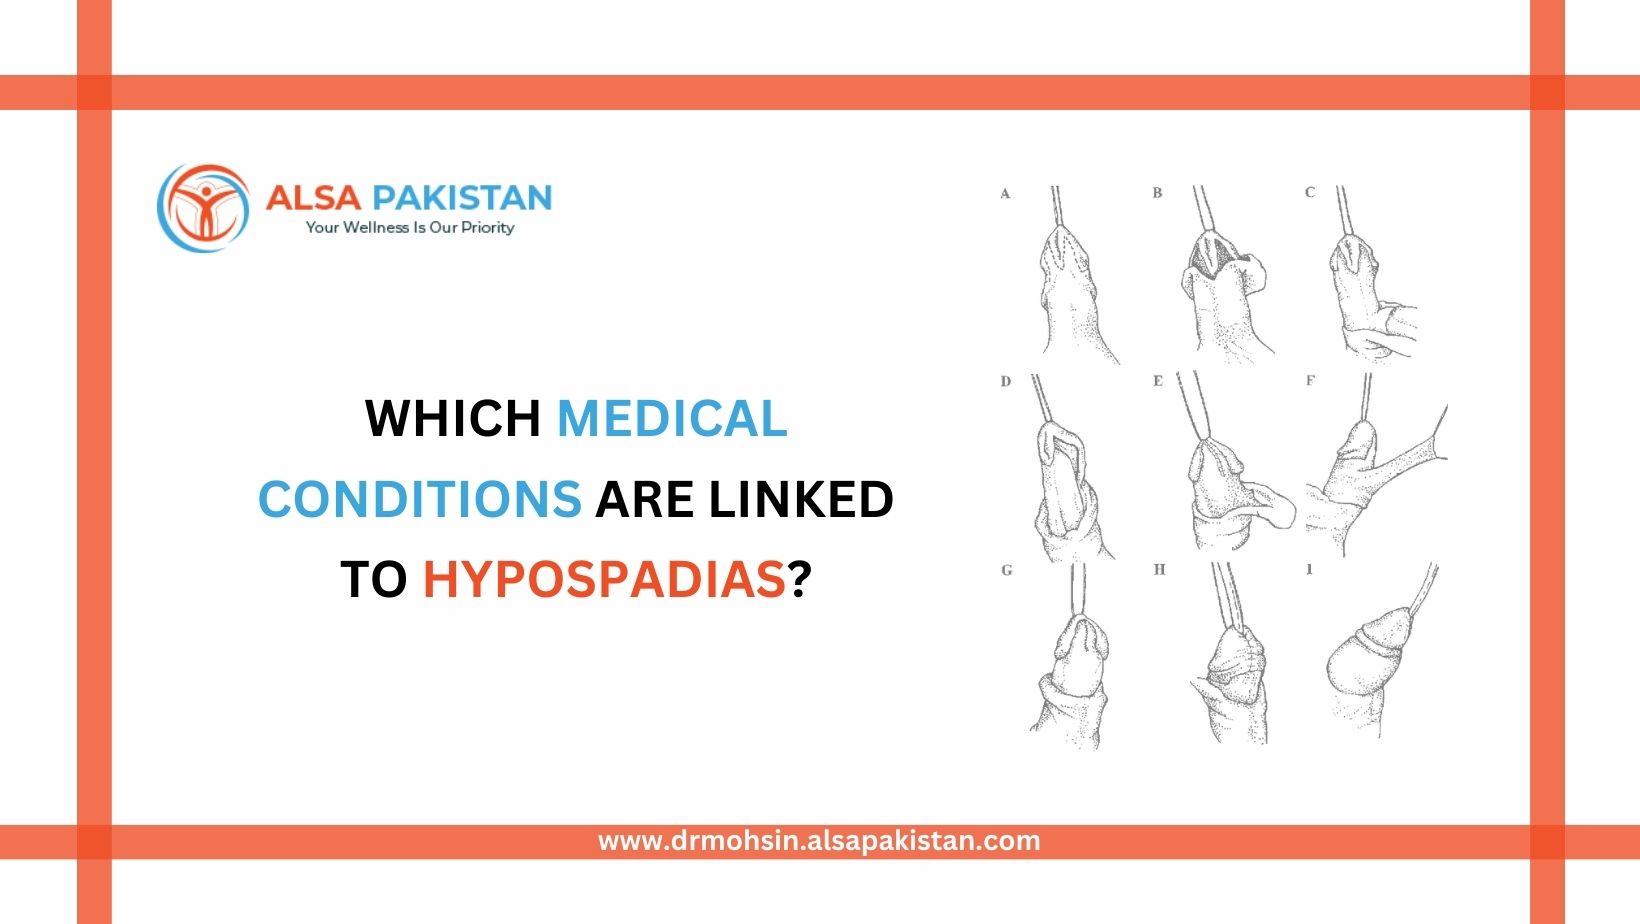 Which medical conditions are linked to hypospadias?